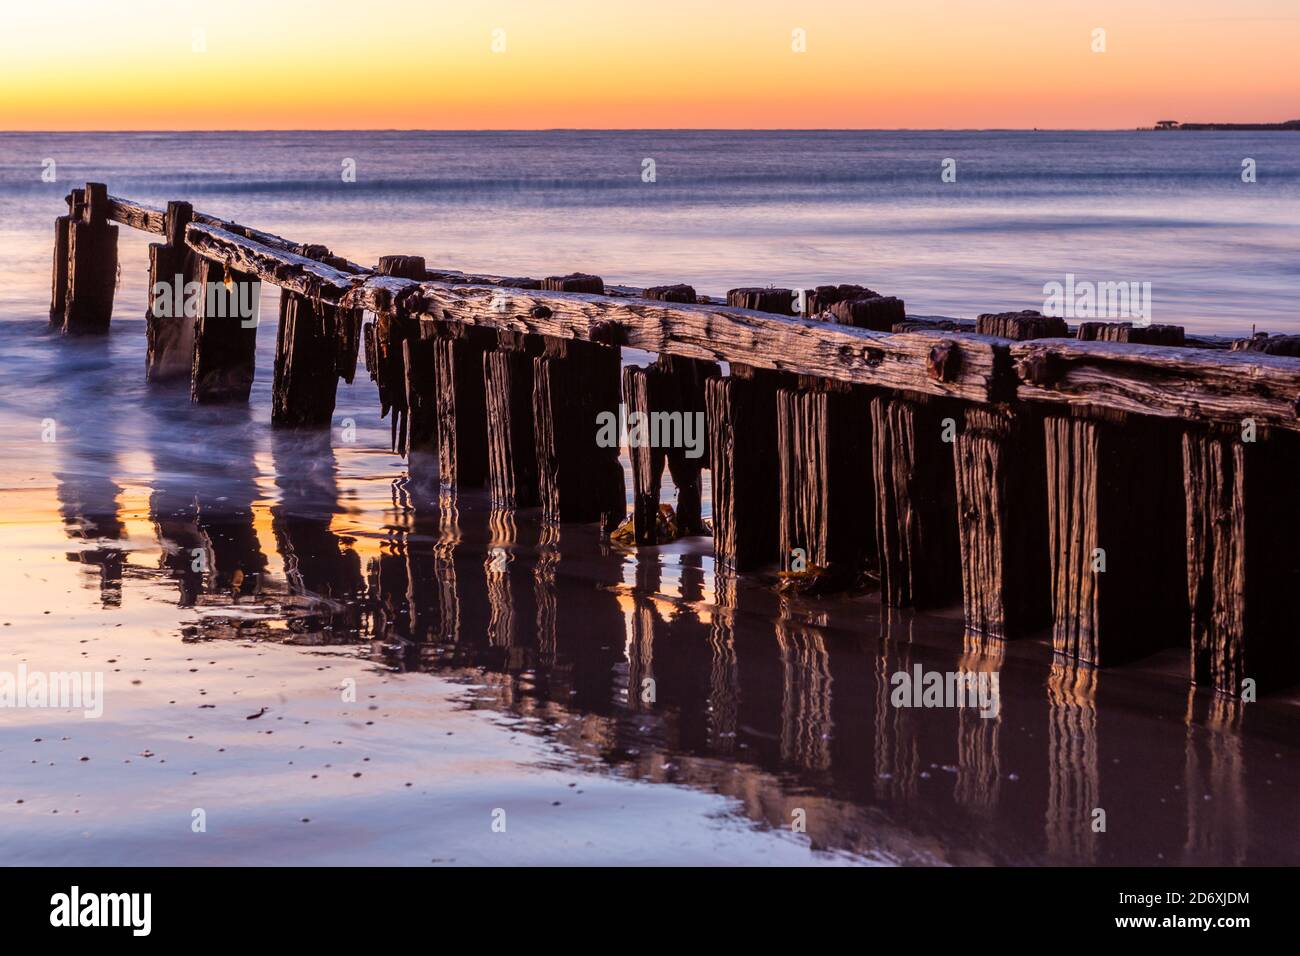 The iconic erosion groynes at sunrise in Victor Harbor South Australia on October 20 2020 Stock Photo